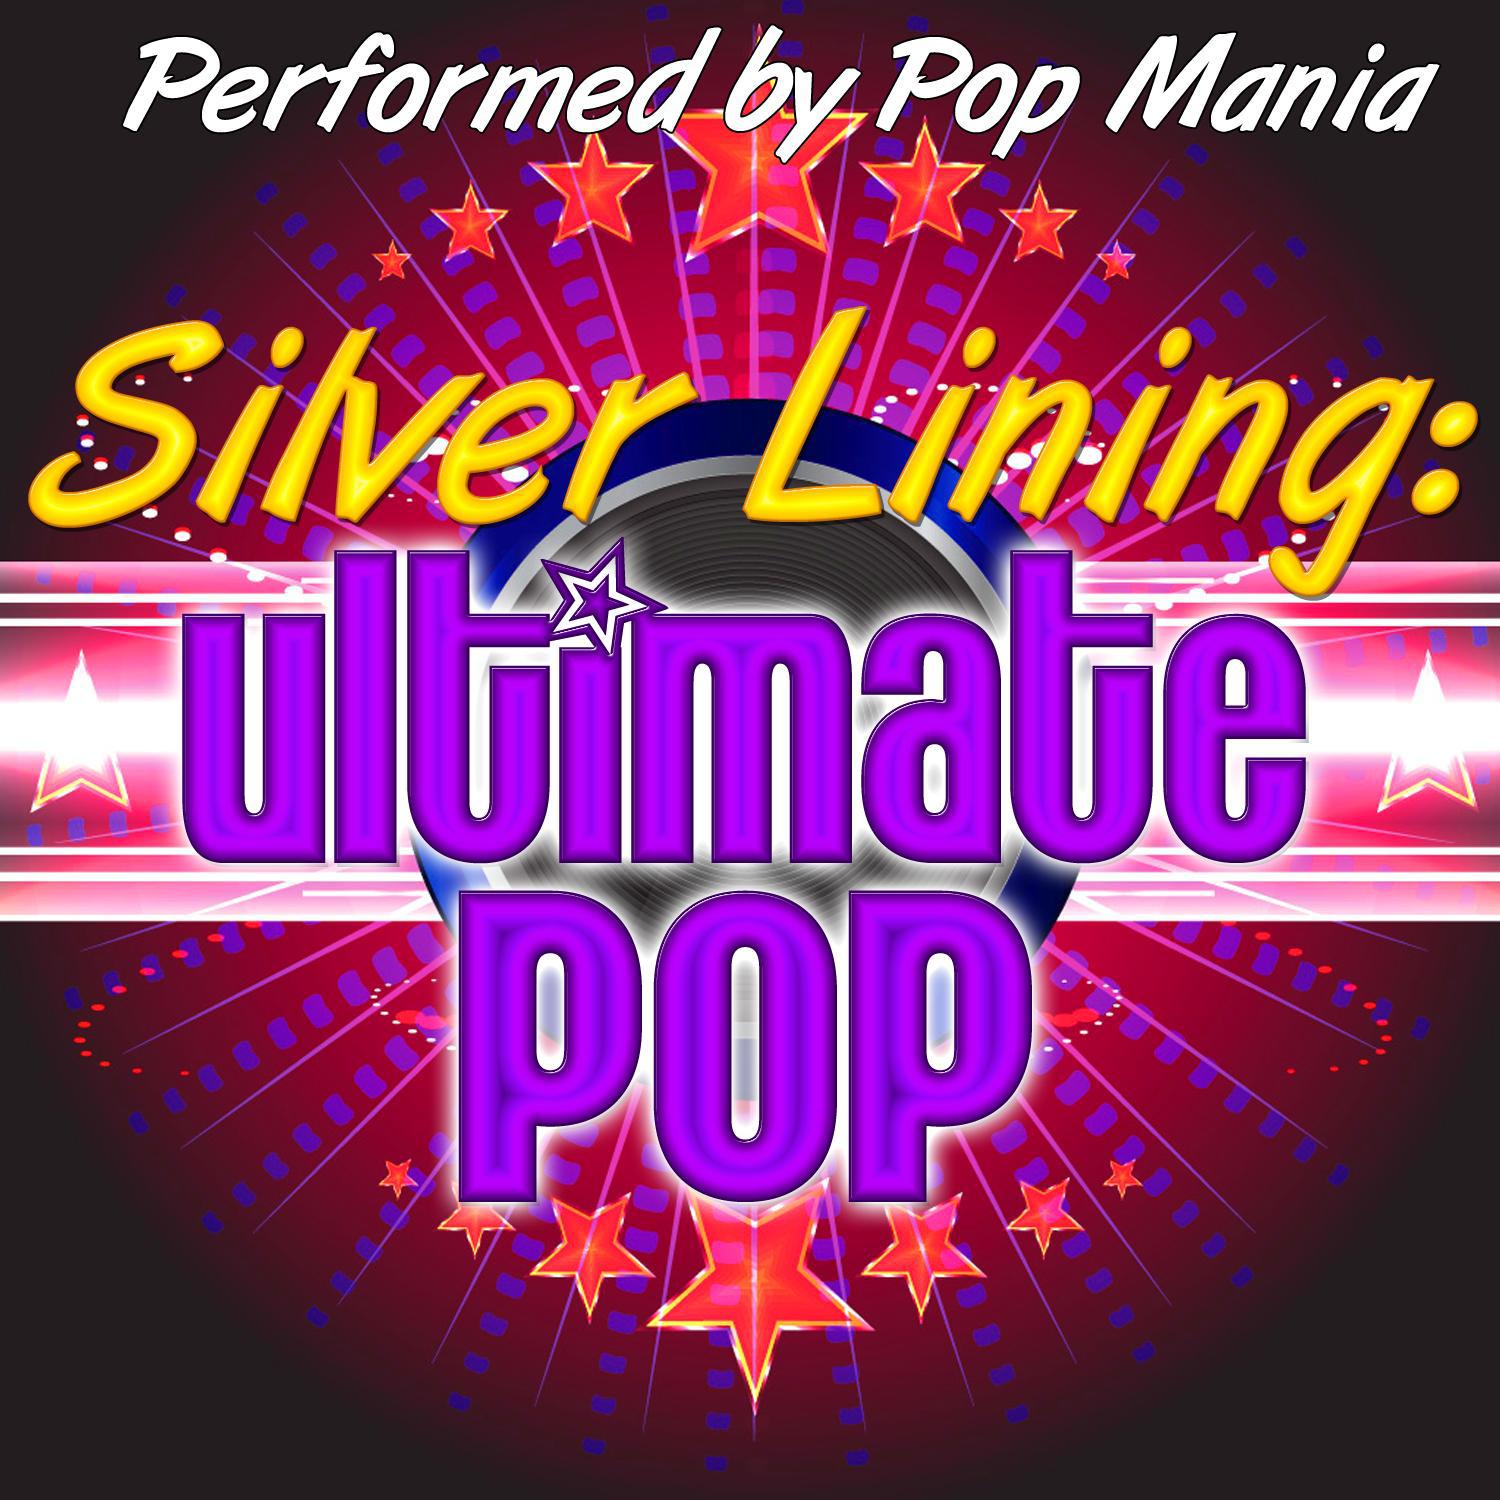 Silver Lining: Ultimate Pop